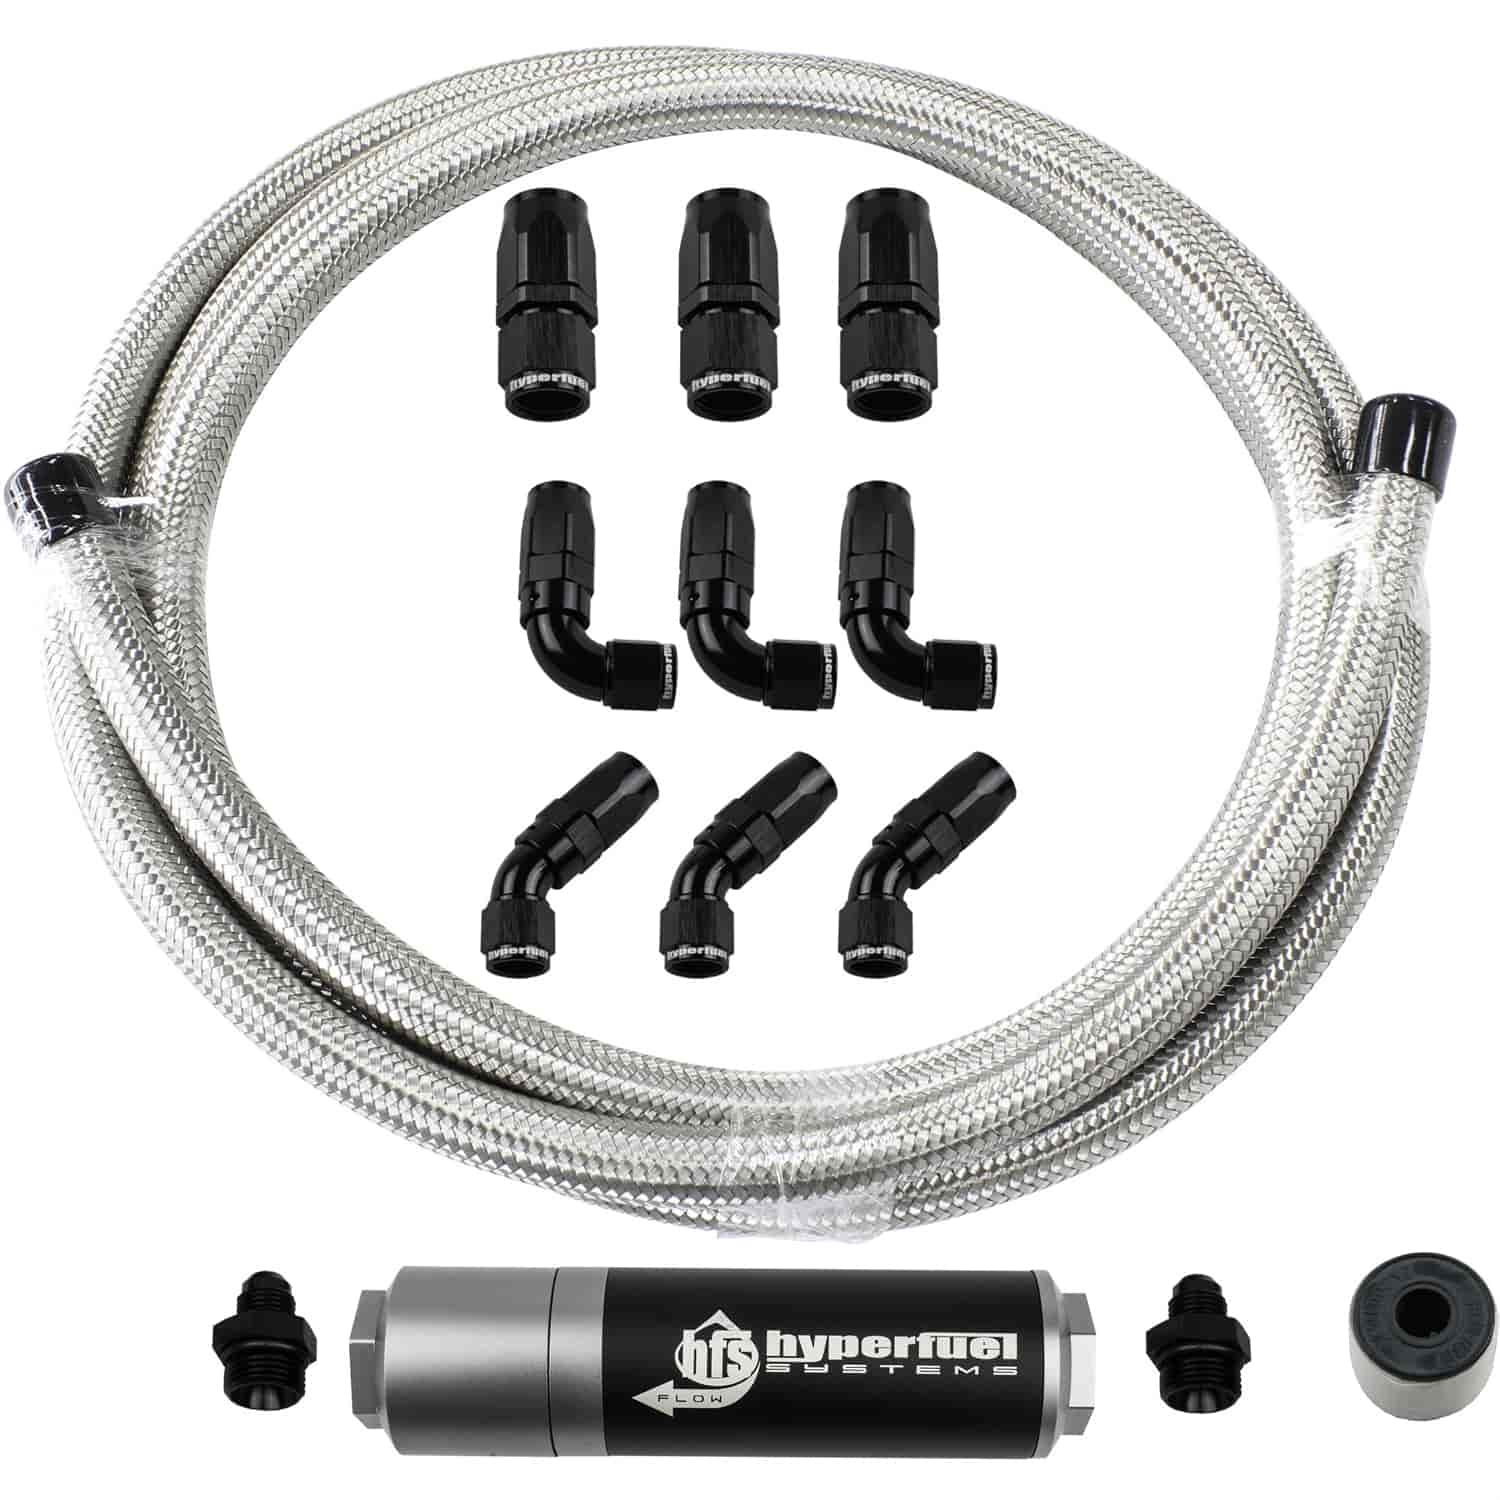 Stainless Steel Braided Hose Kit Natural 20 ft.